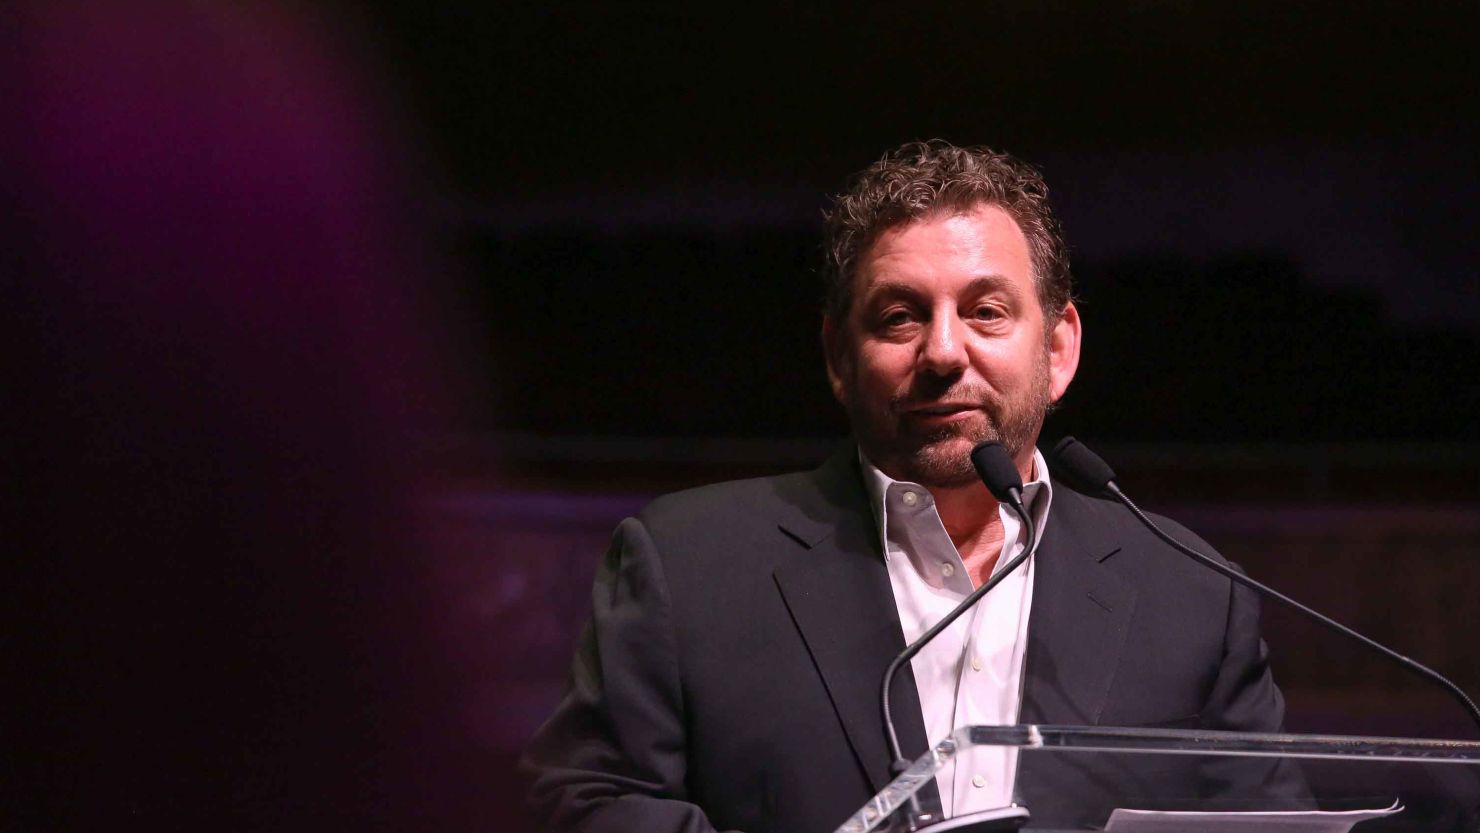 The New York Daily News has been critical of Knicks owner James Dolan.